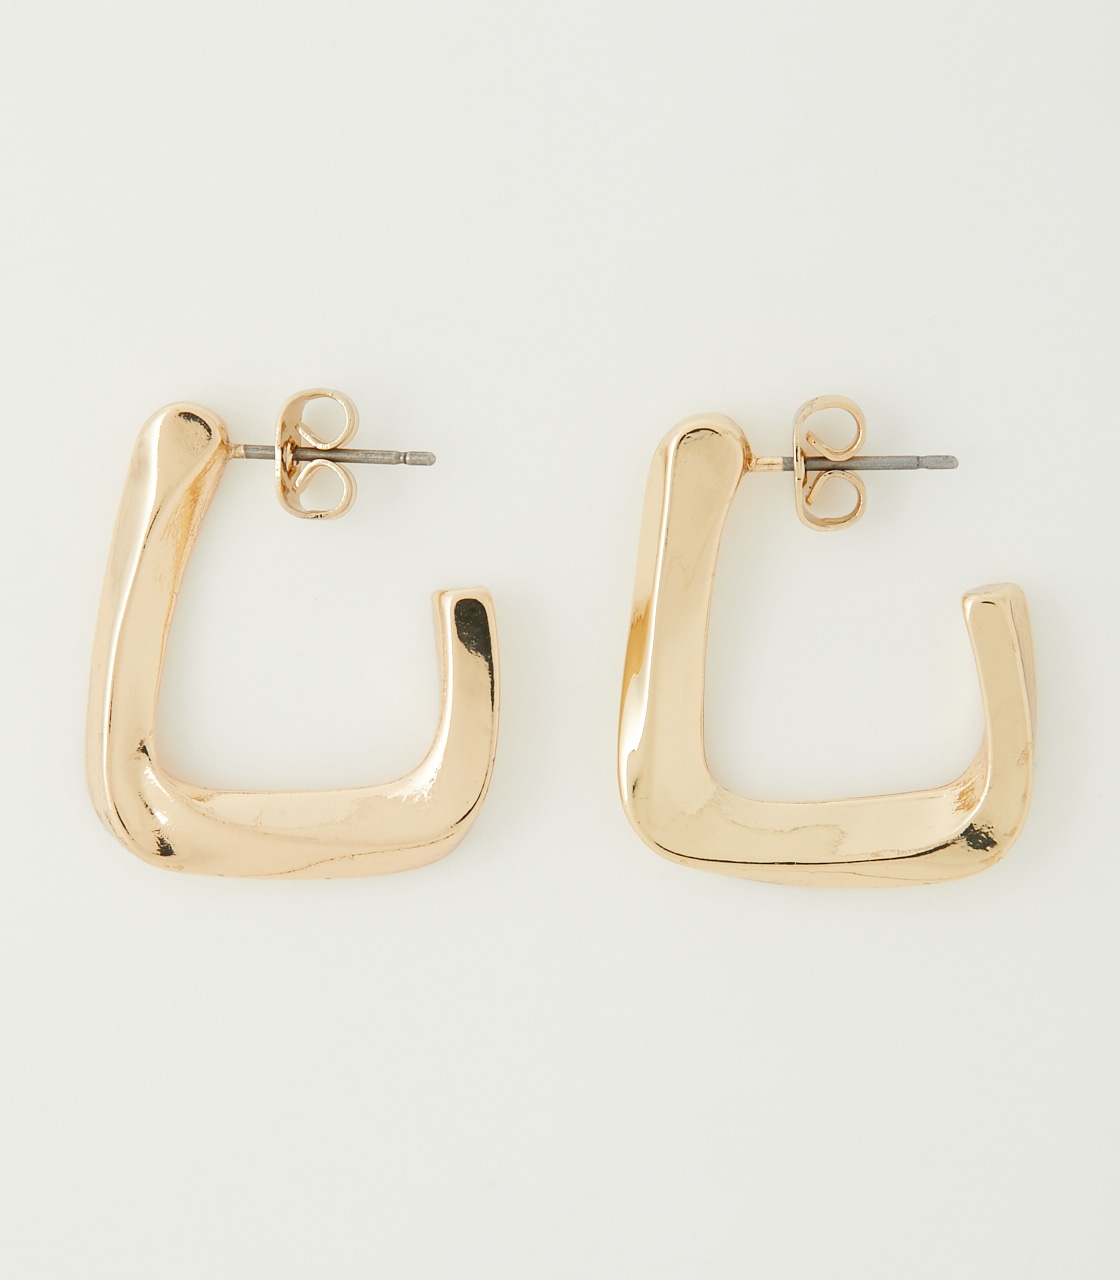 SQUARE METAL EARRINGS/スクエアメタルピアス 詳細画像 L/GLD 1